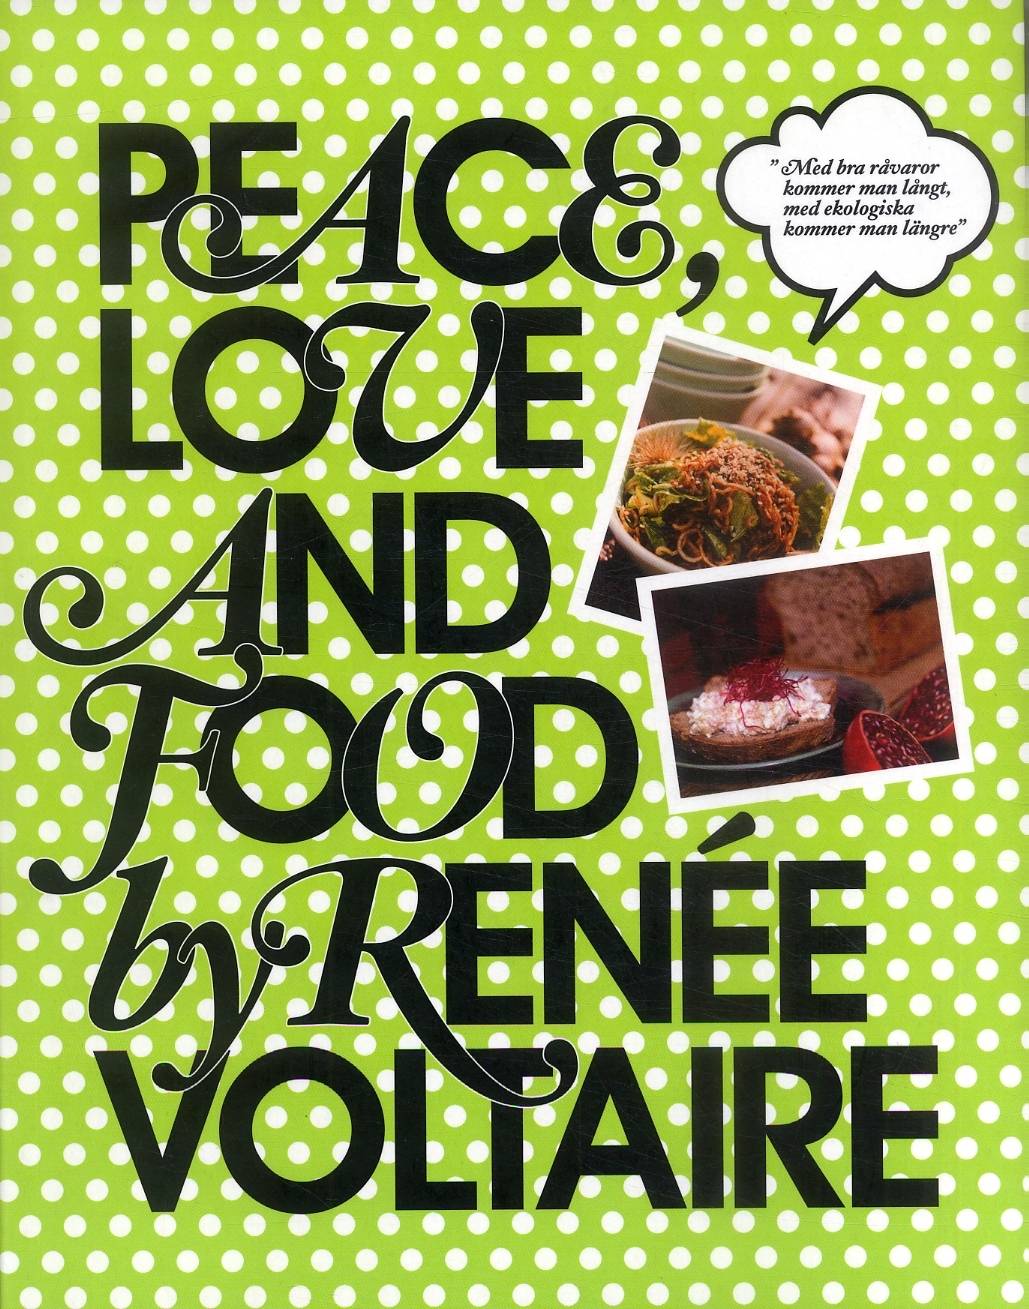 Peace, Love and Food by Renée Voltaire